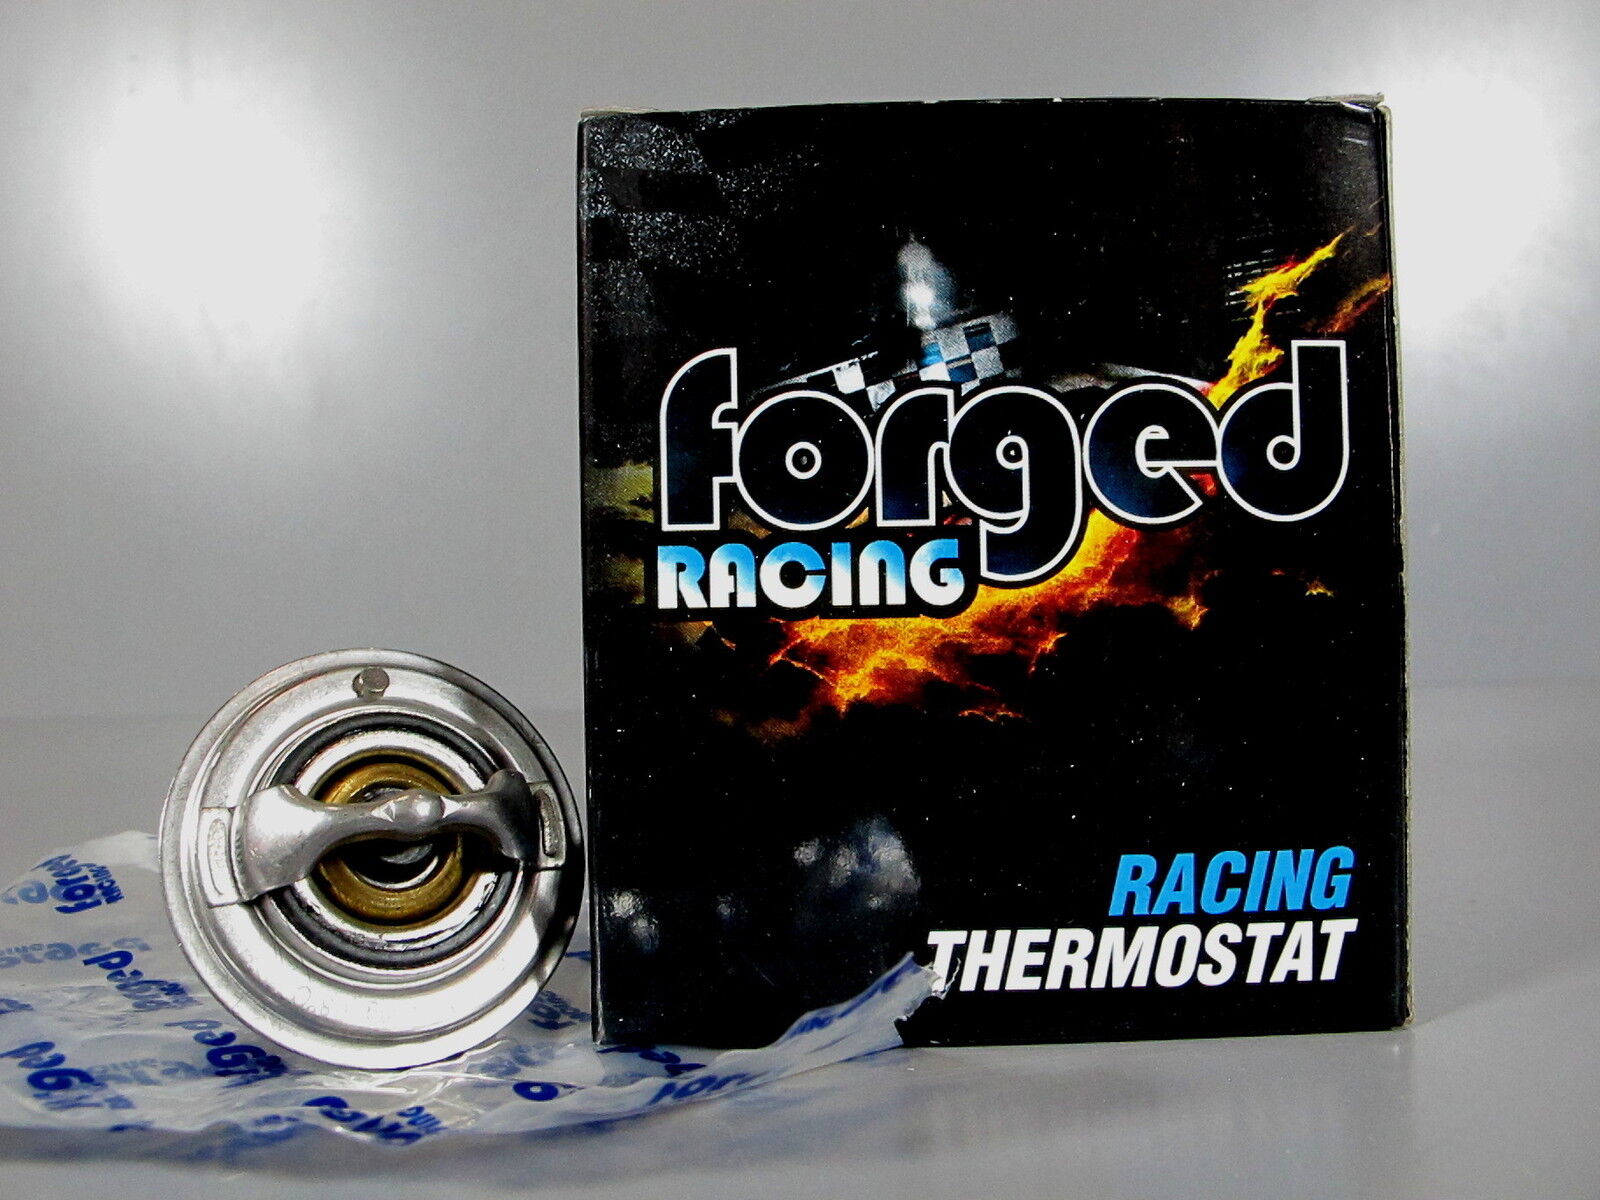 NEW FORGED RACING Thermostat for Nissan 240SX Silvia S14 SR20DET Primera Terrano